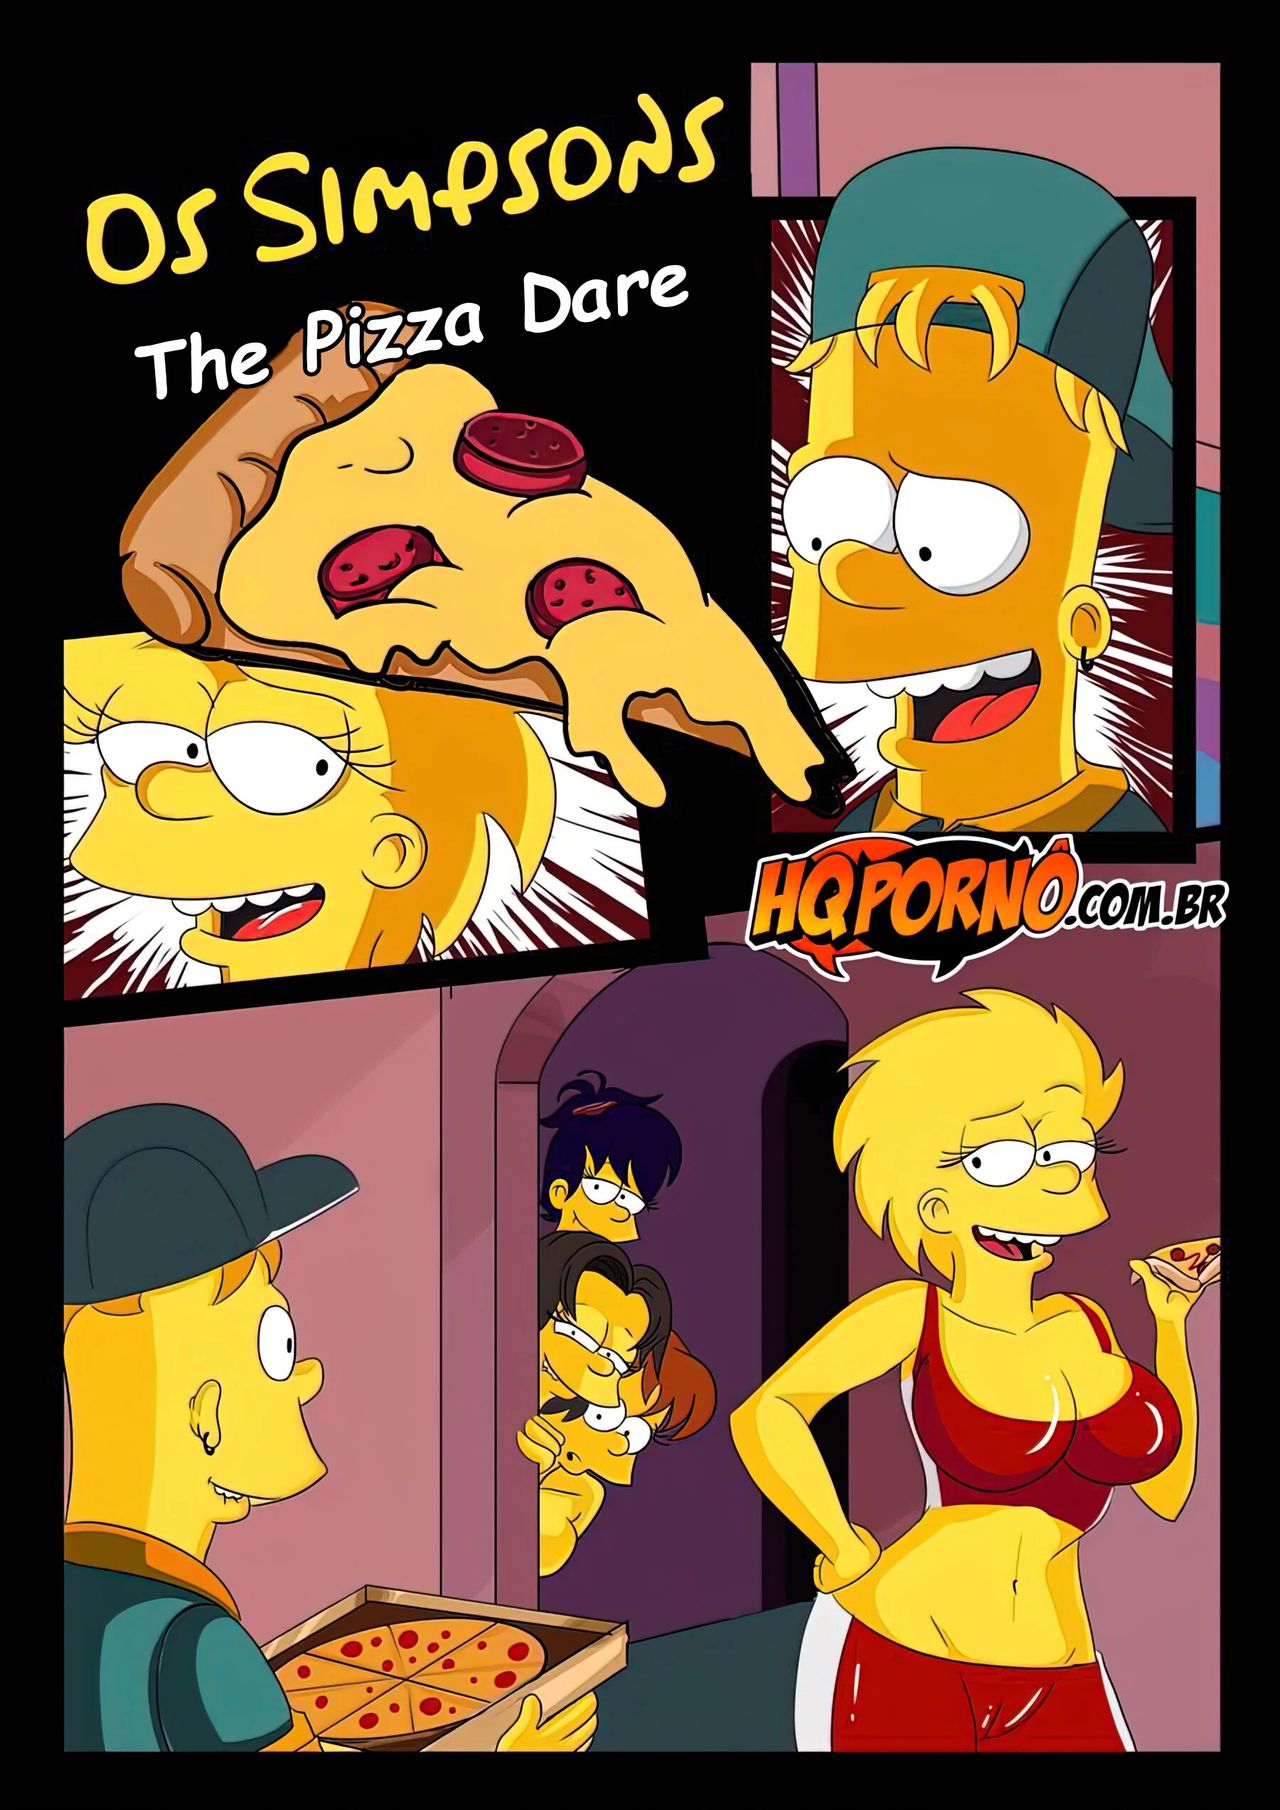 OS Simpsons - The Pizza Dare 2 by HQporno - FreeAdultComix